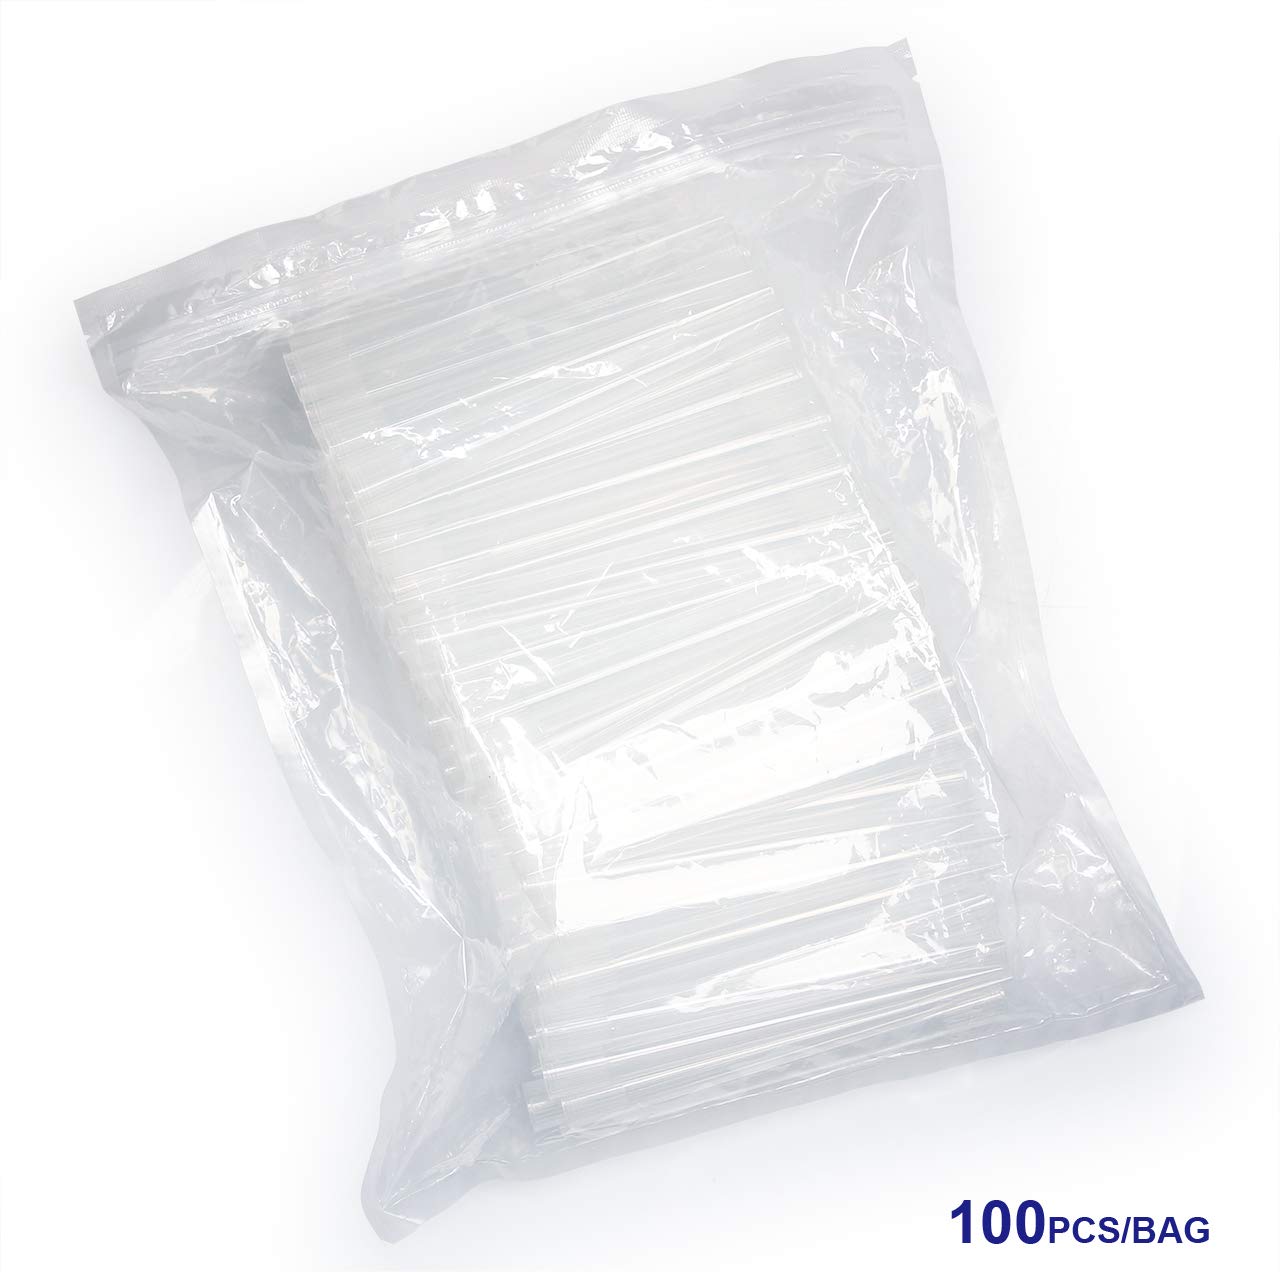 10mL Pipette Tips, 10 mL Universal Micro Pipette Tip, Polypropylene (P ...